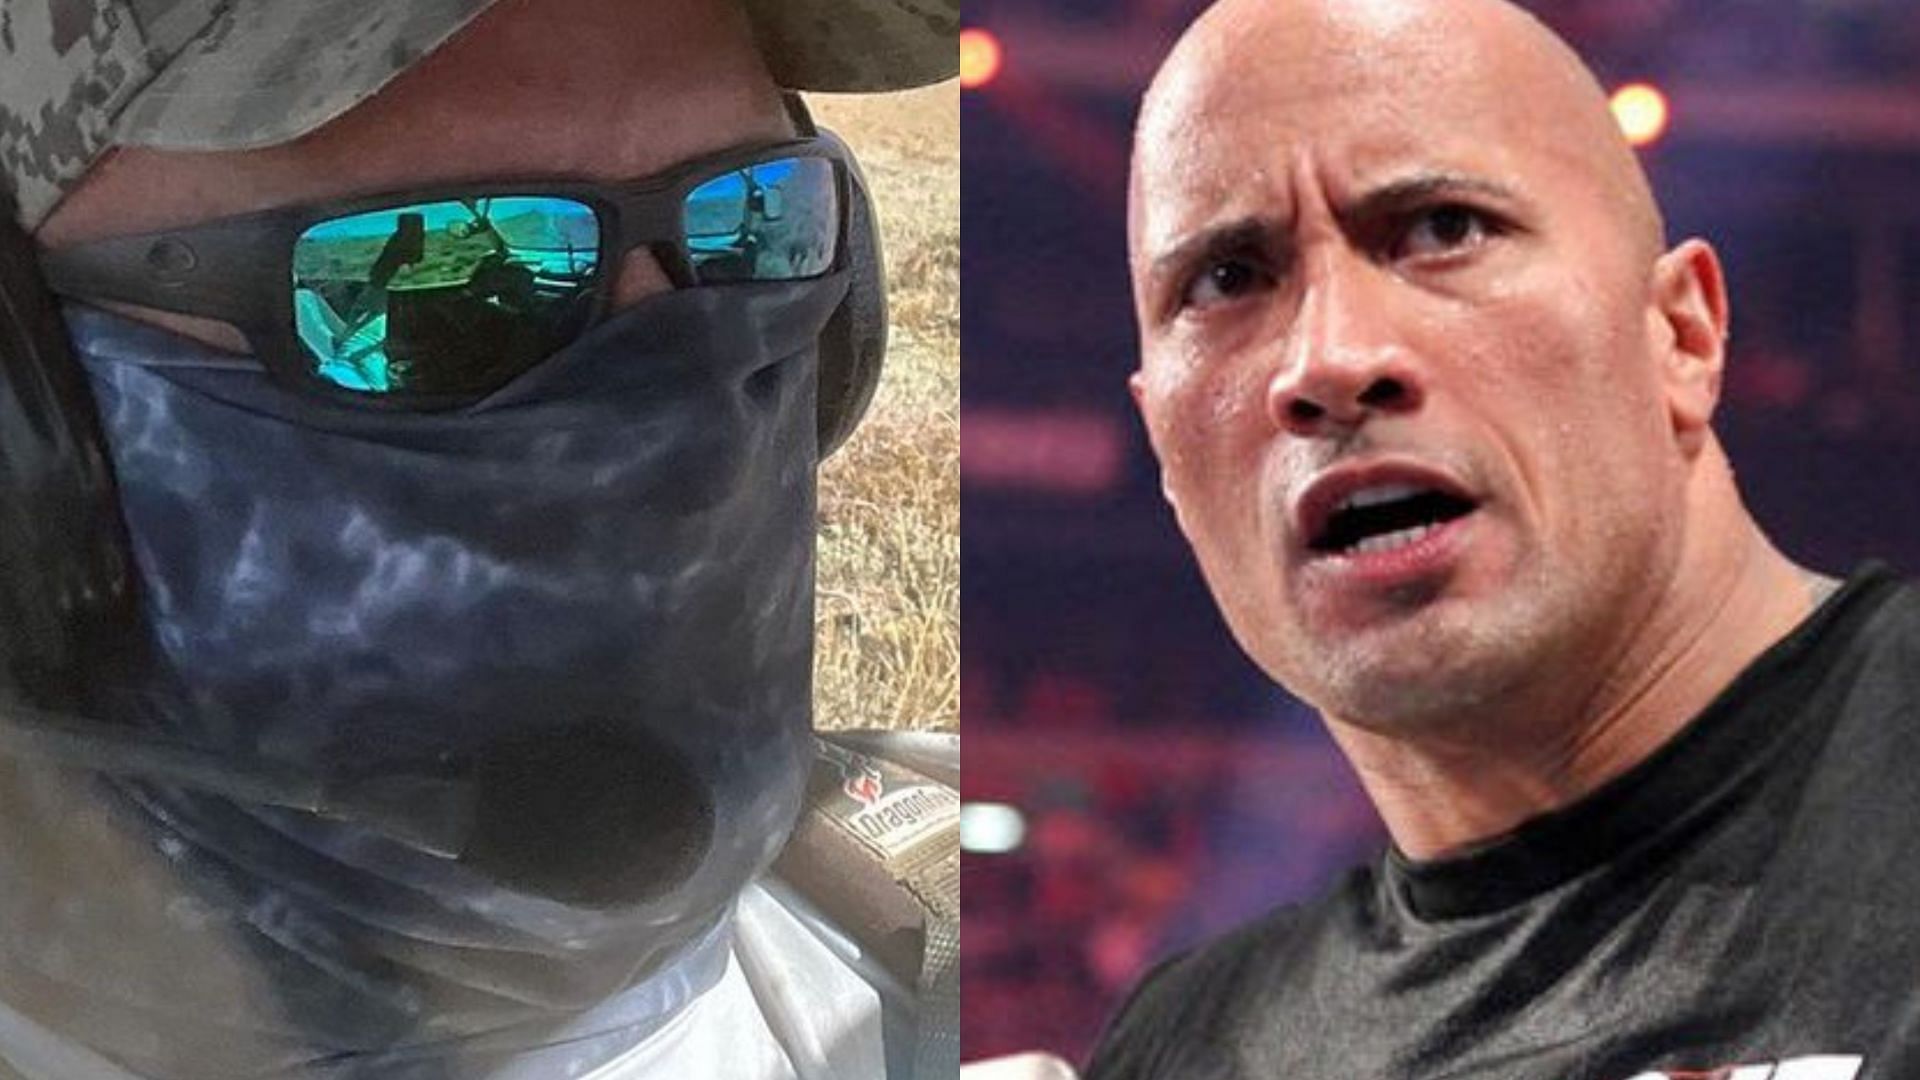 WWE Hall of Famer Stone Cold Steve Austin (left) and The Rock (right)